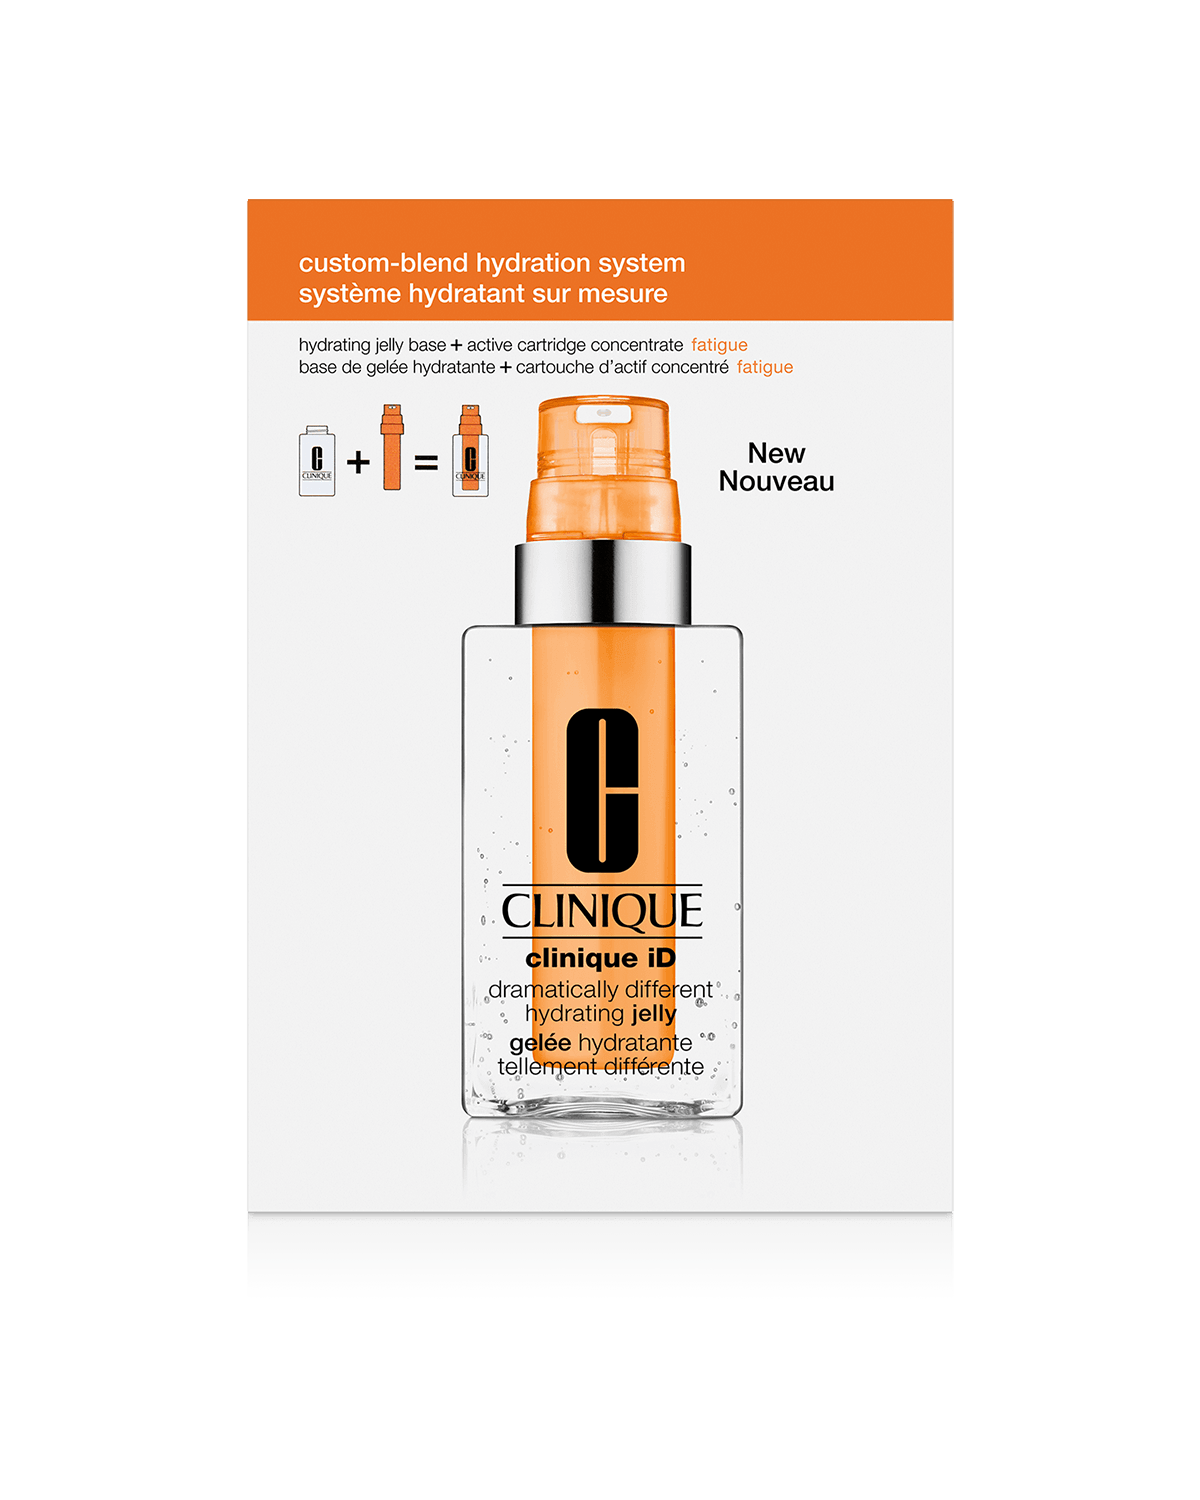 Clinique iD Active Concentrate Fatigue + Dramatically Different Hydrating Jelly